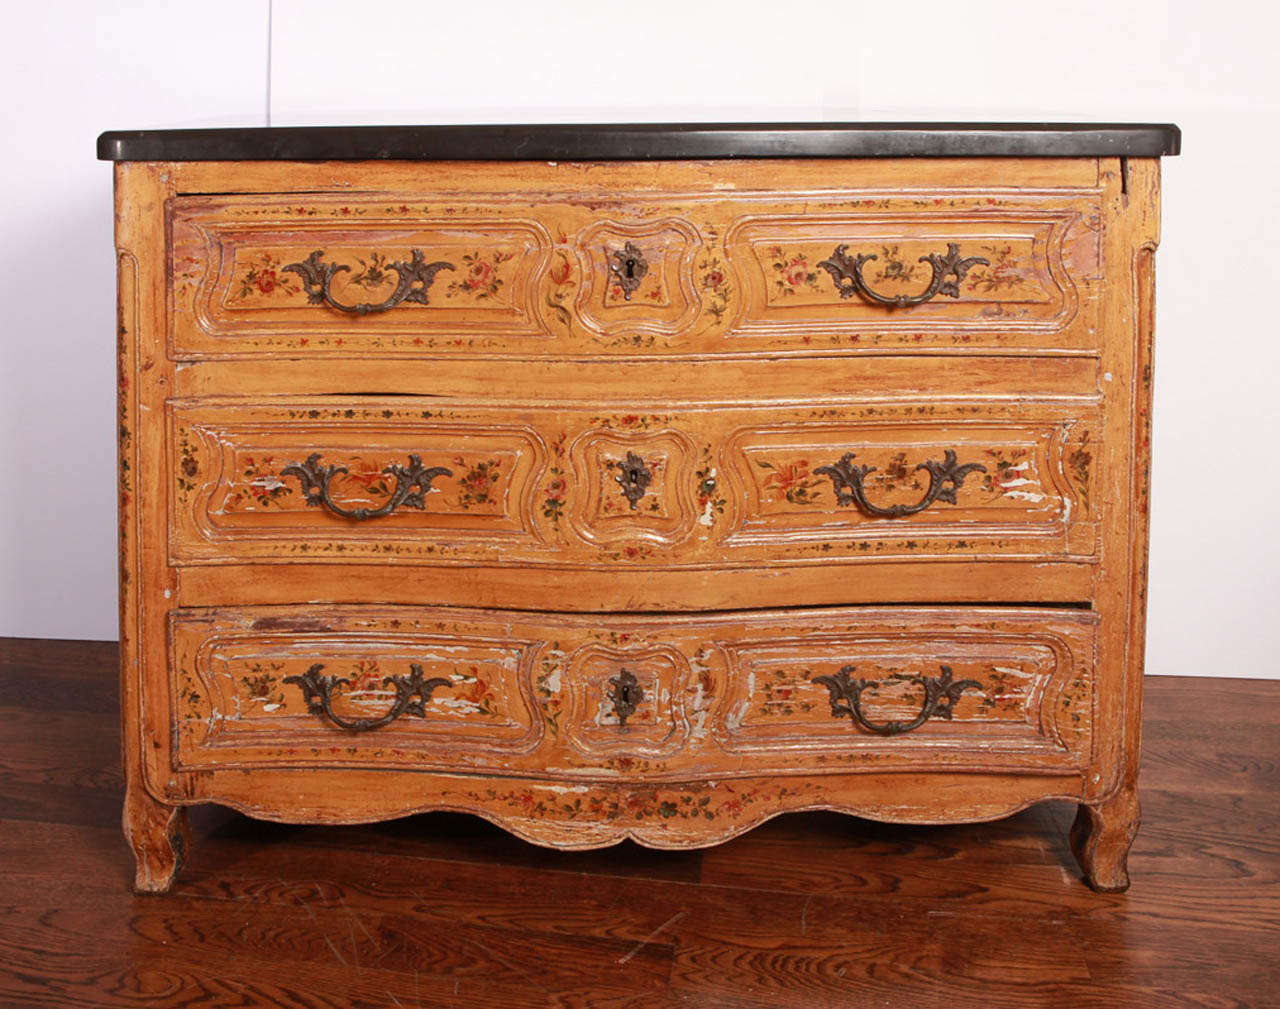 Commode has serpentine front. The three drawers and sides of commode are painted with foliate sprays. Black marble top. Bronze hardware. Cabriole legs.  Previously owned by Consuelo Vanderbilt Balsan.